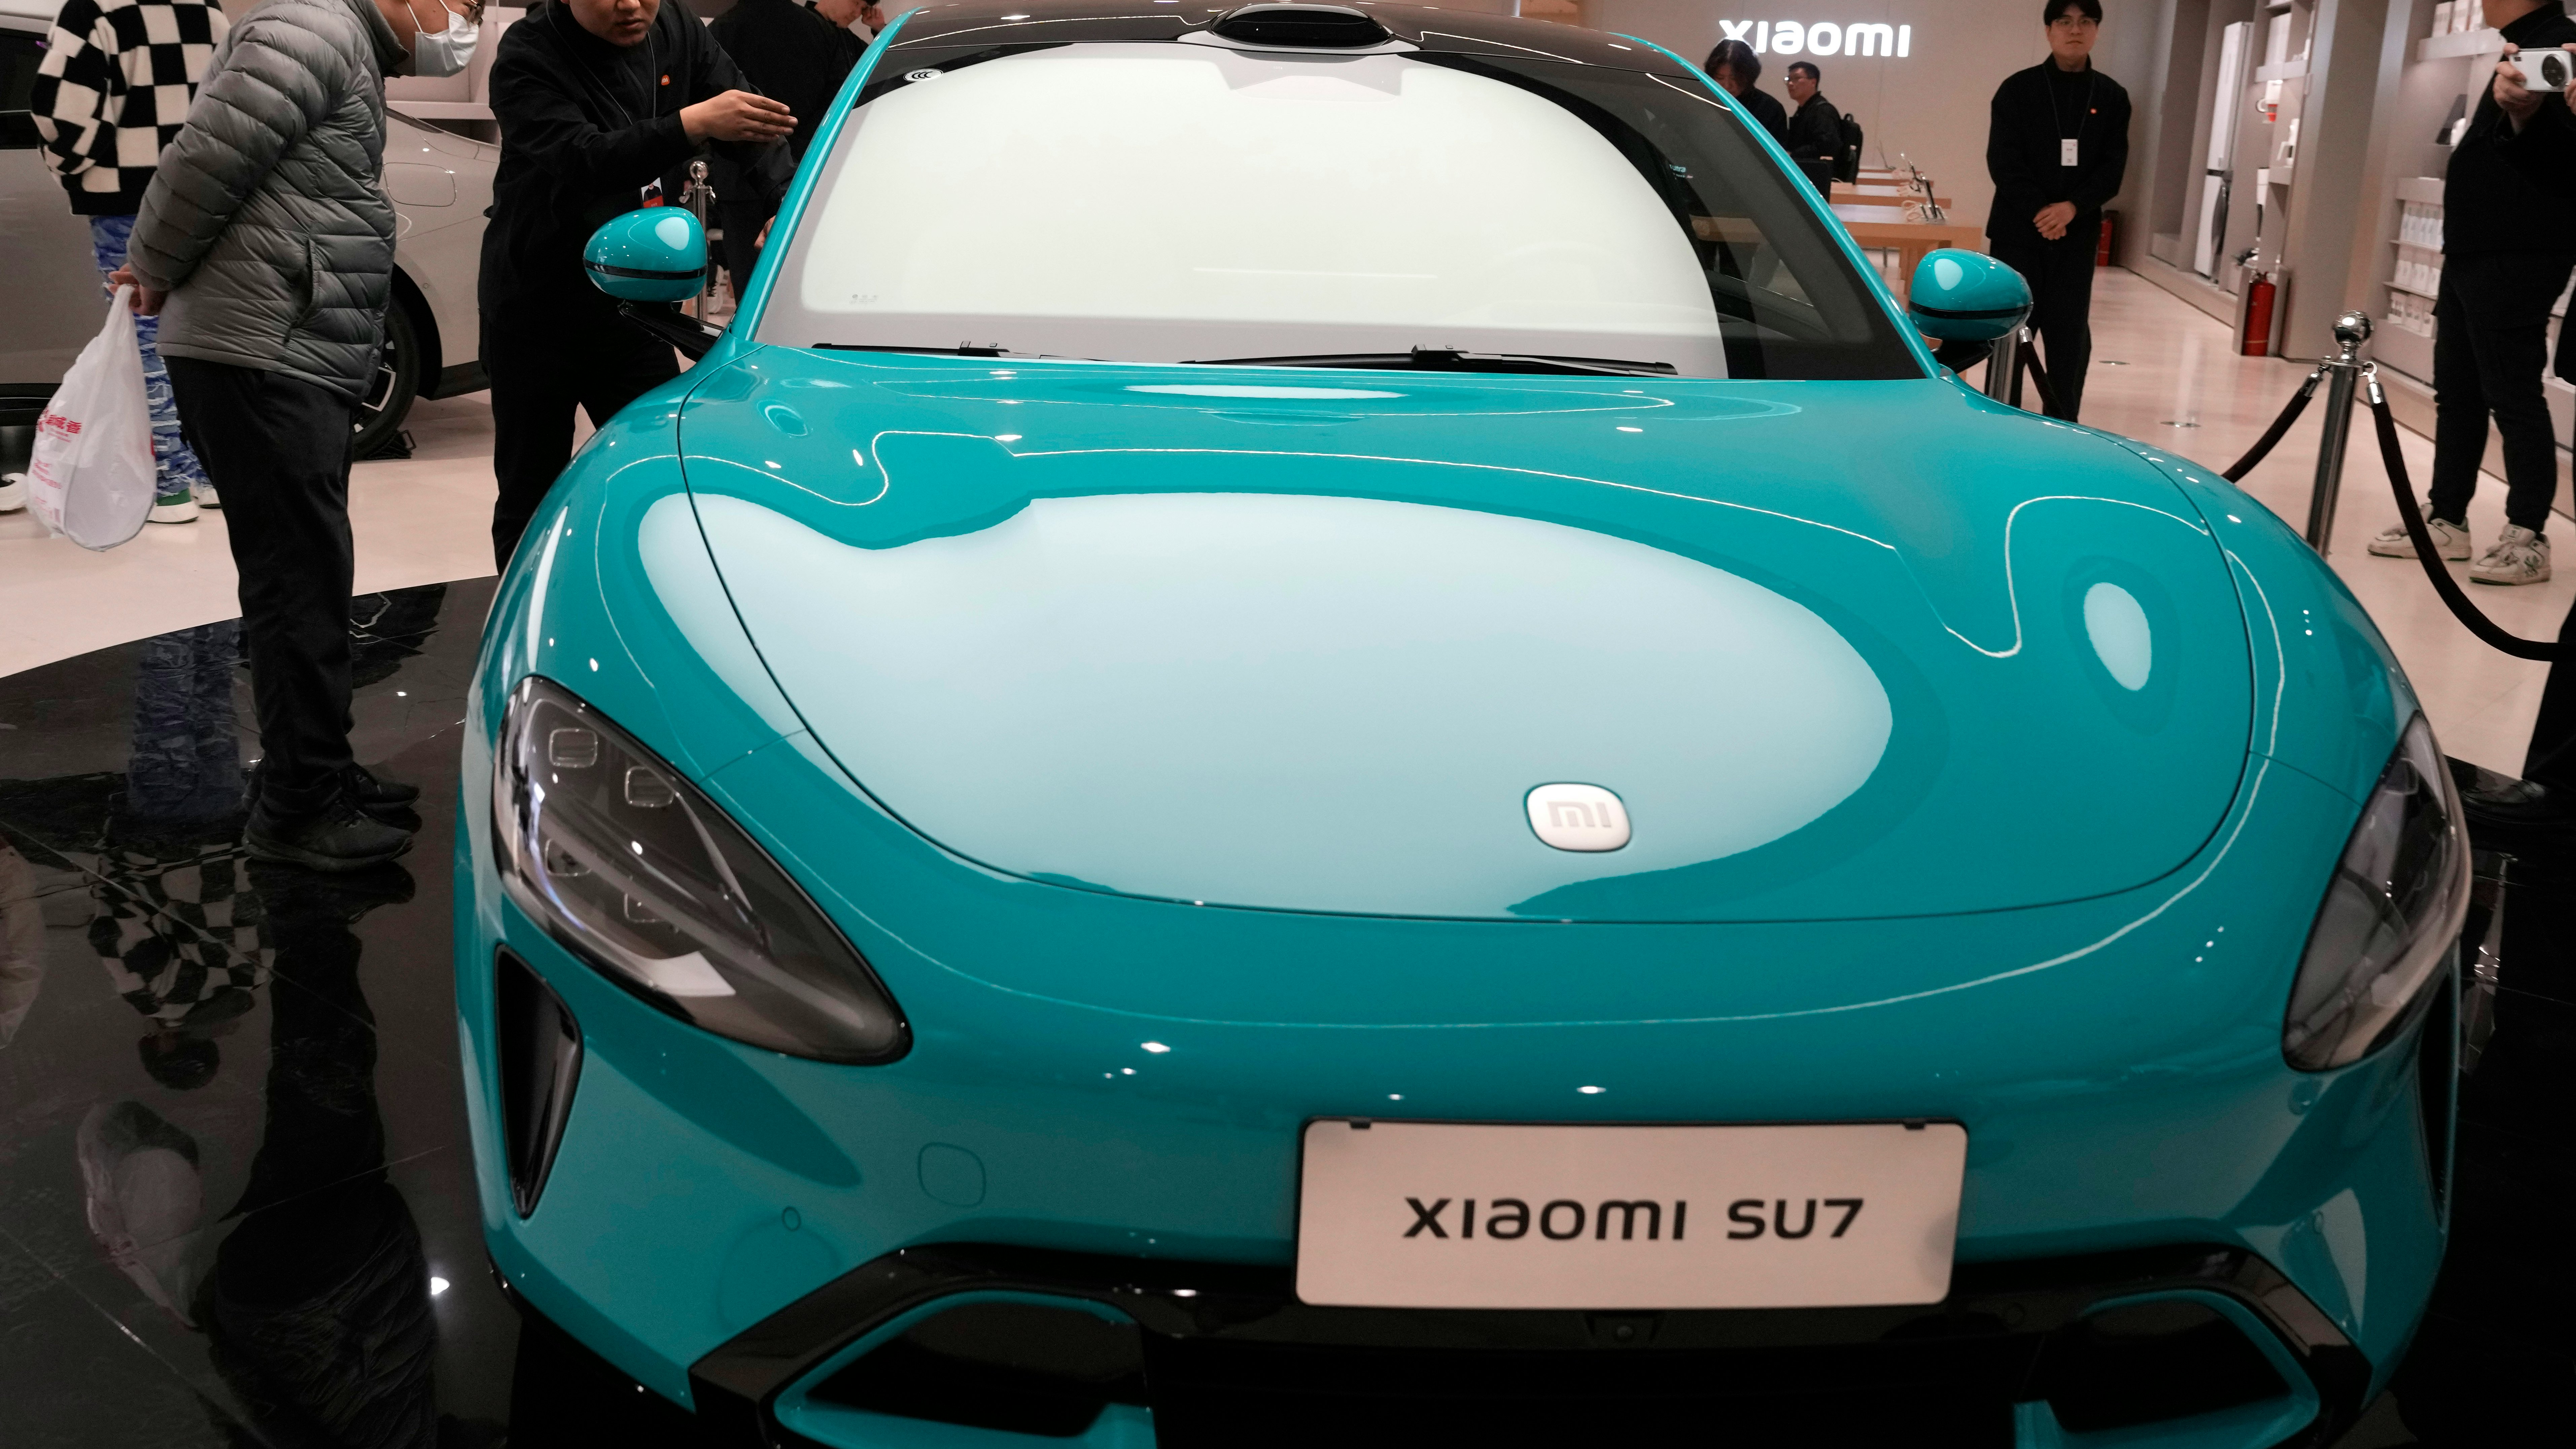 China's Latest EV is a 'Connected' Car from Smart Phone Maker Xiaomi